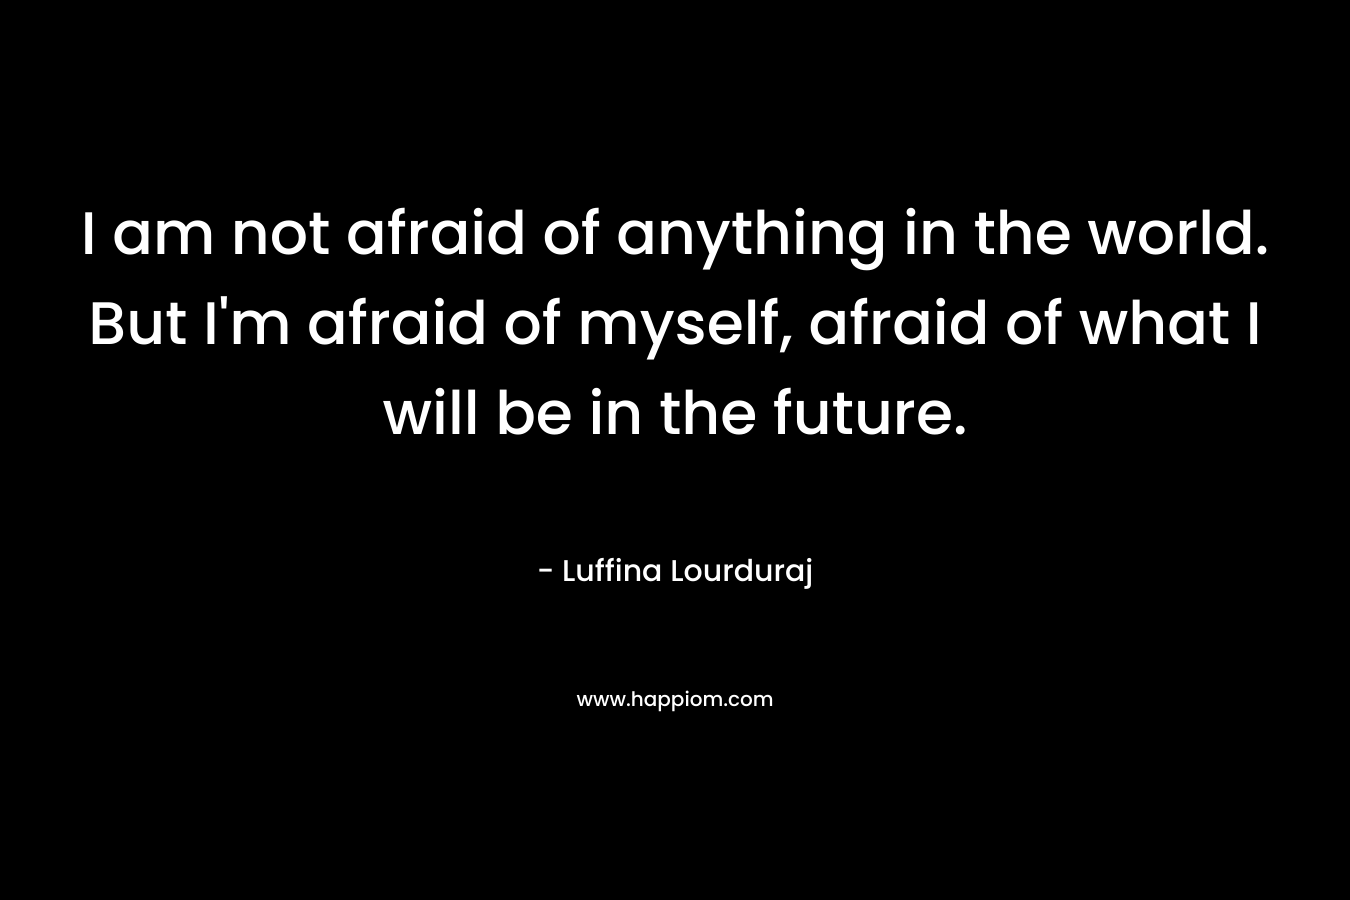 I am not afraid of anything in the world. But I’m afraid of myself, afraid of what I will be in the future. – Luffina Lourduraj